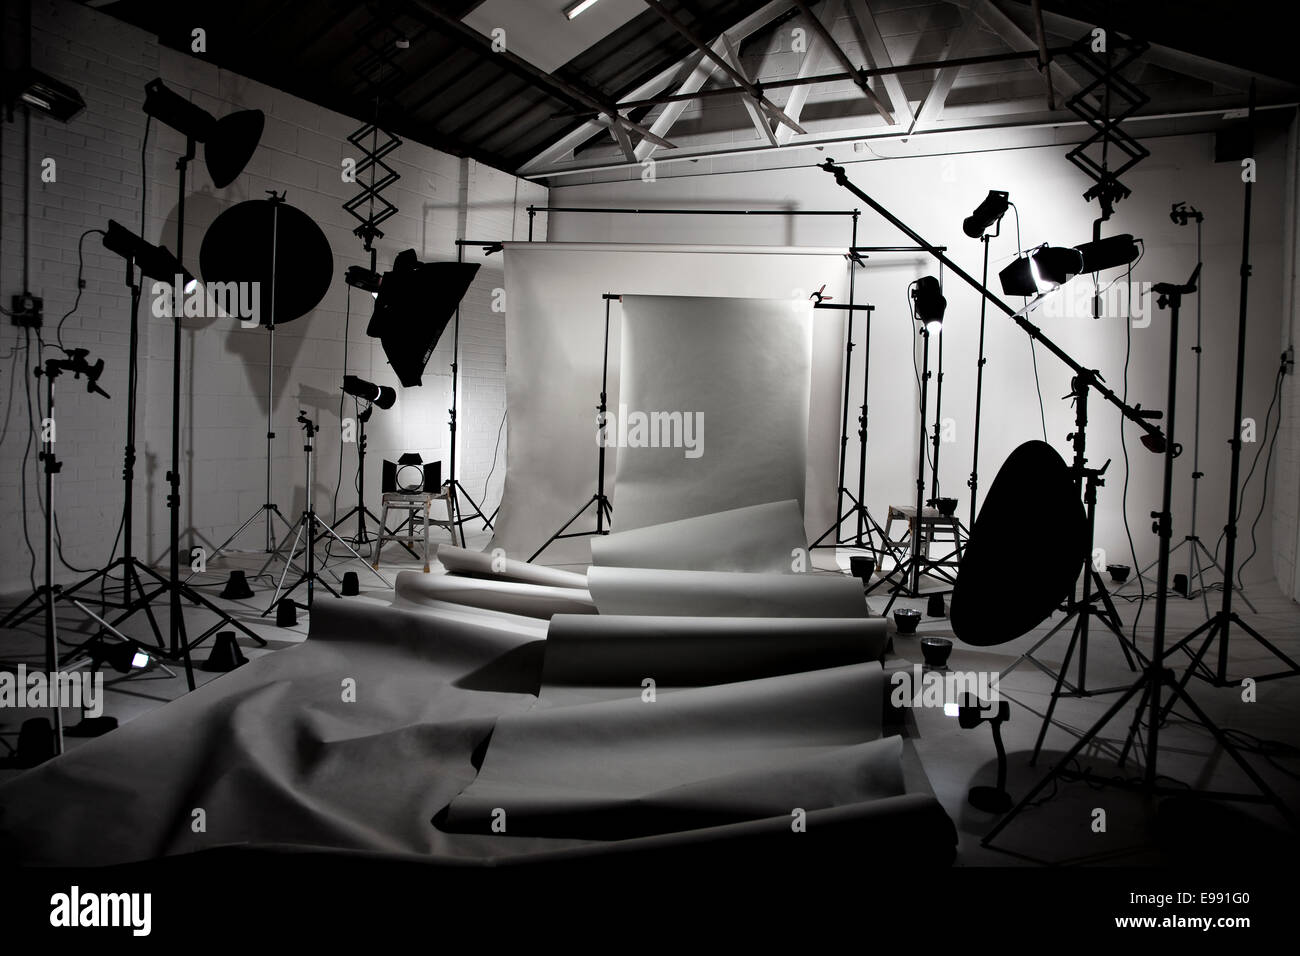 a photography studio with all the lighting equipment and paper backdrop rolls laid out to demonstrate the space Stock Photo